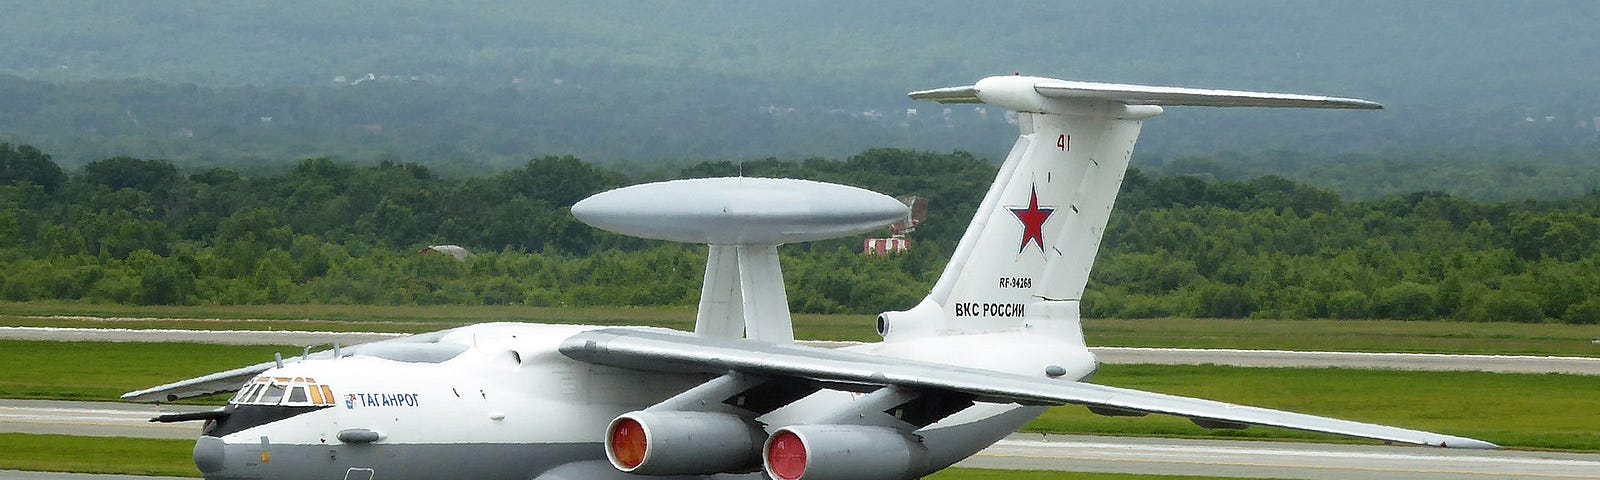 Russia Loses Key AWACs And An Airborne Command Centre — How? A huge loss for the Putin’s forces: Russia claims it was friendly fire, Ukraine says ‘We did it’ — who’s telling the truth?